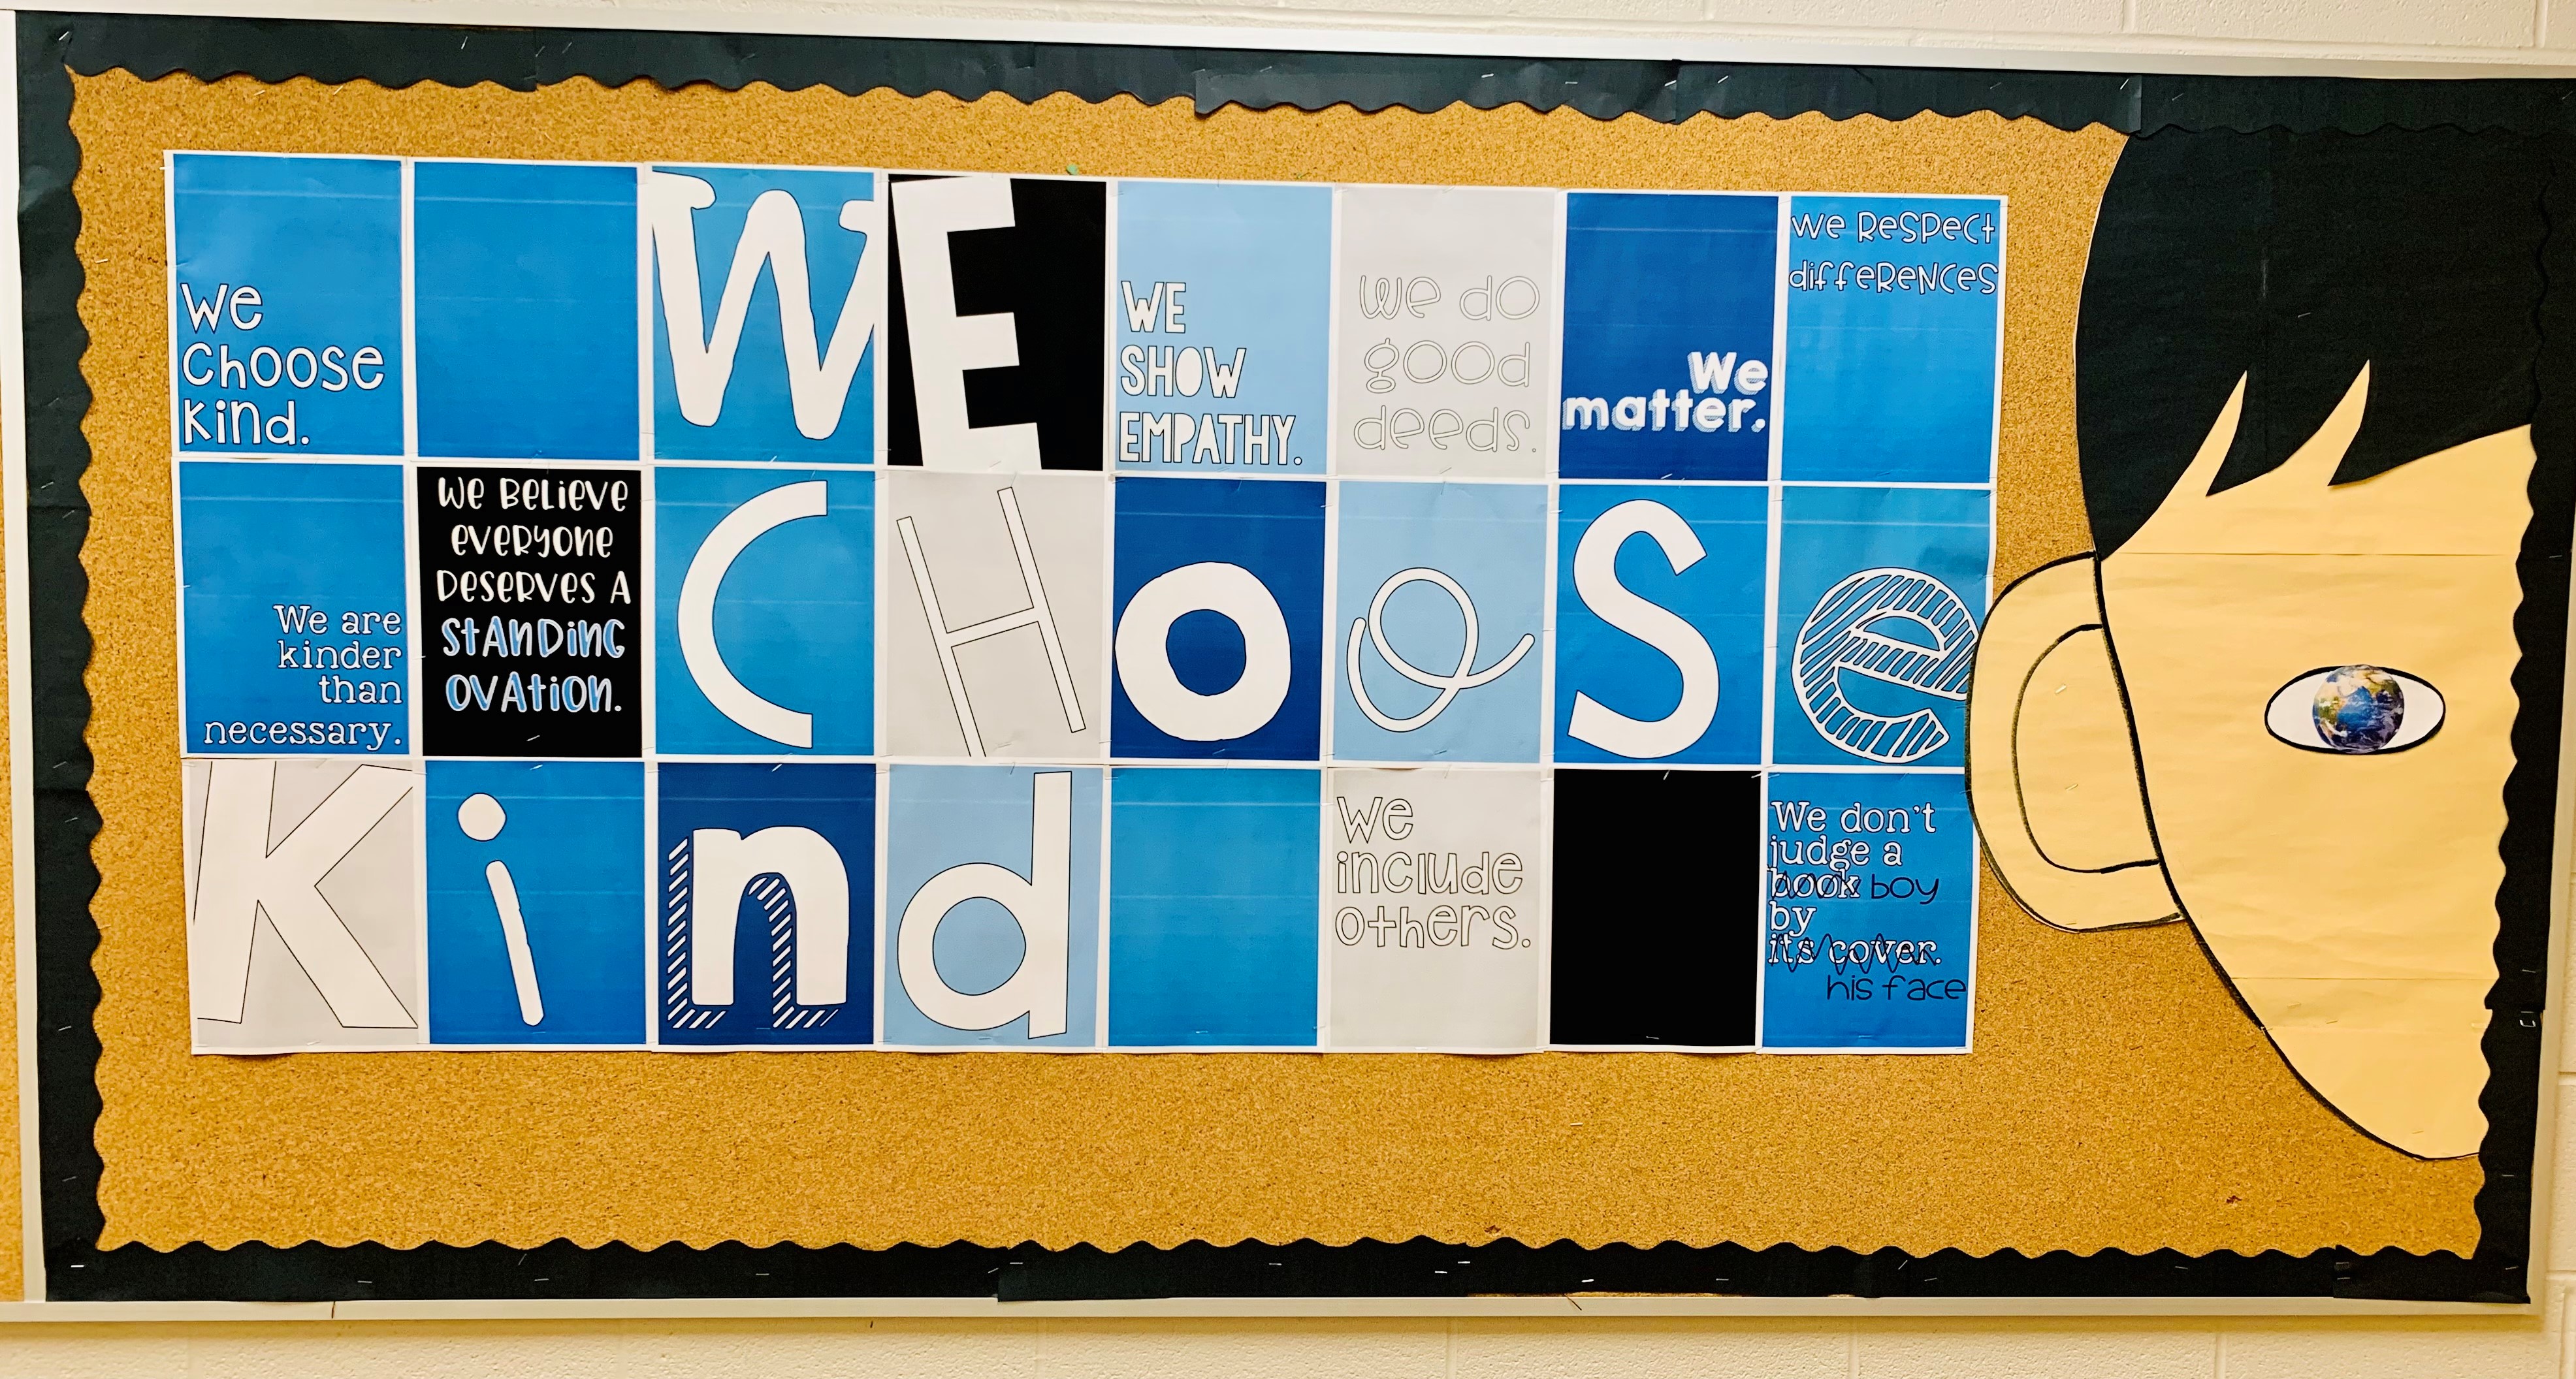 Bullatin Board of Kindness inspired from the book Wonder